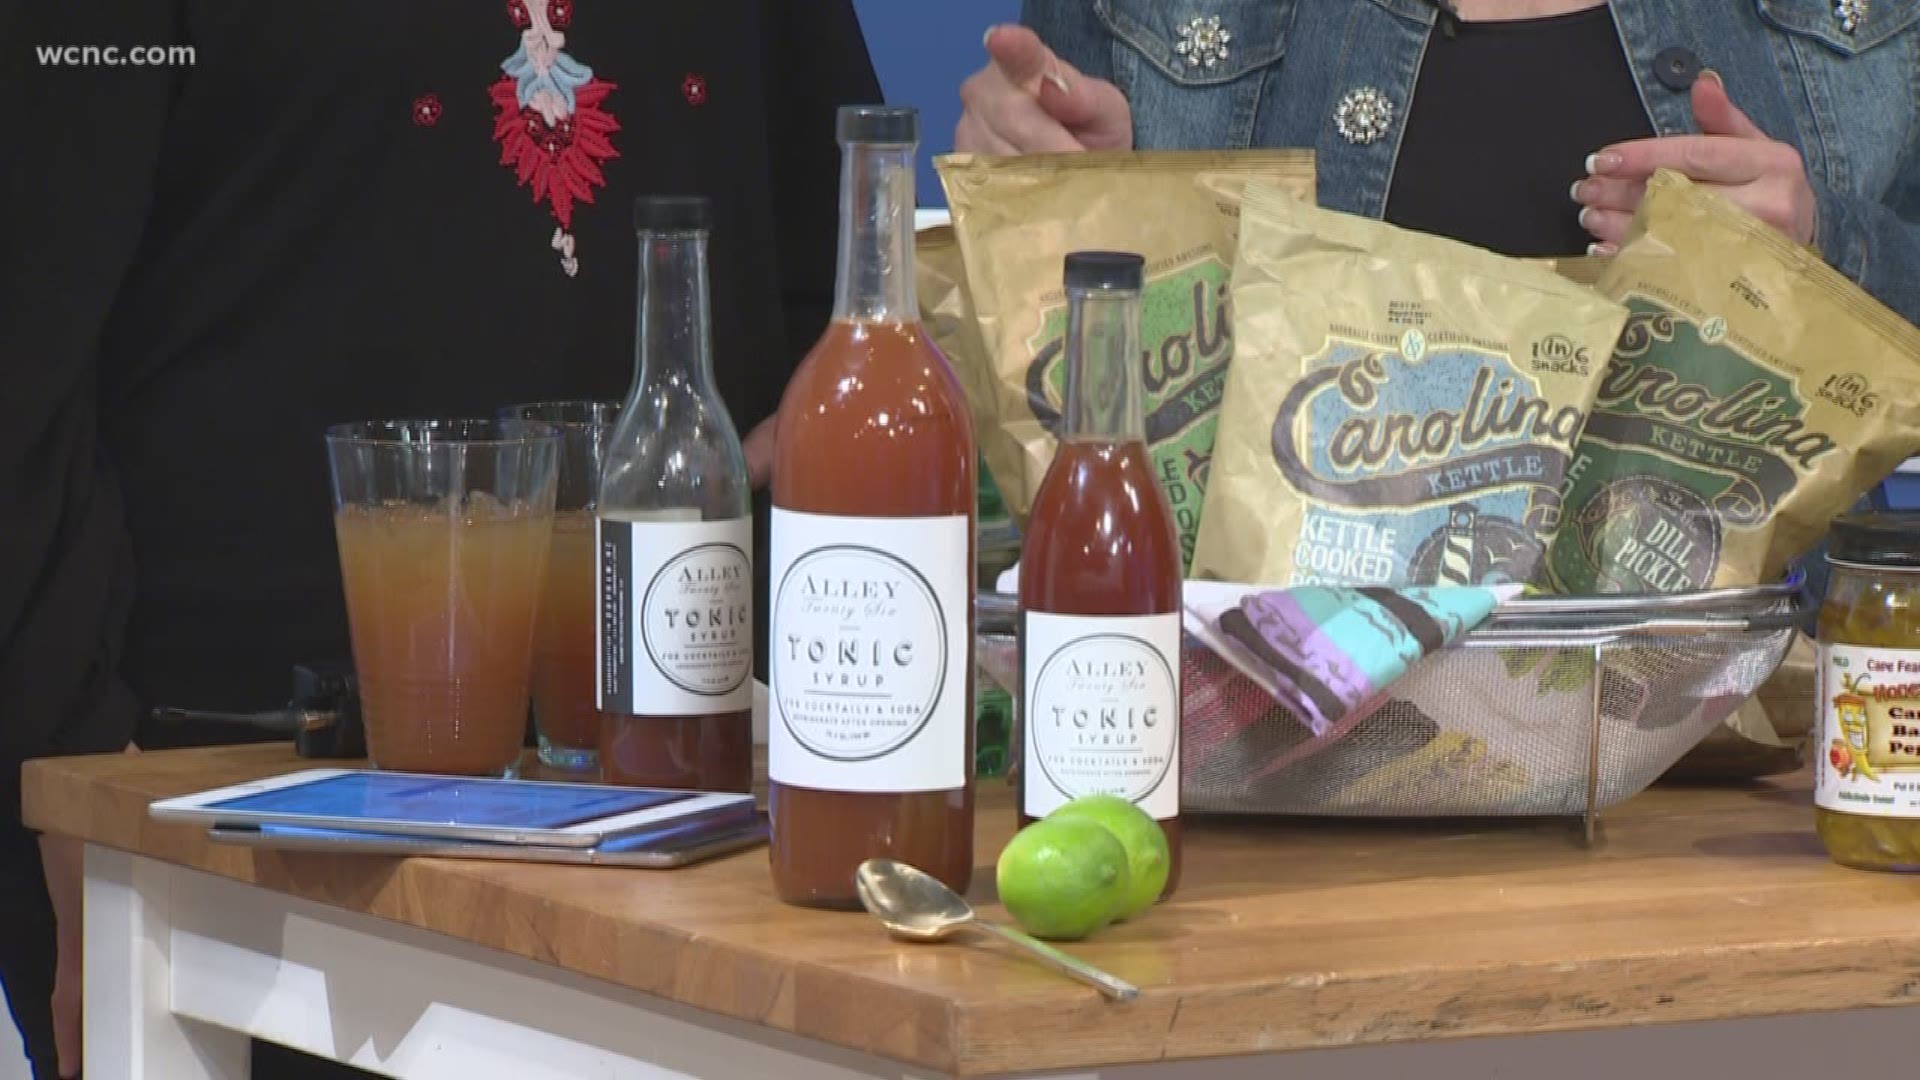 Charlotte culinary expert, Heidi Billotto, shares six locally made products that are absolutely delicious.